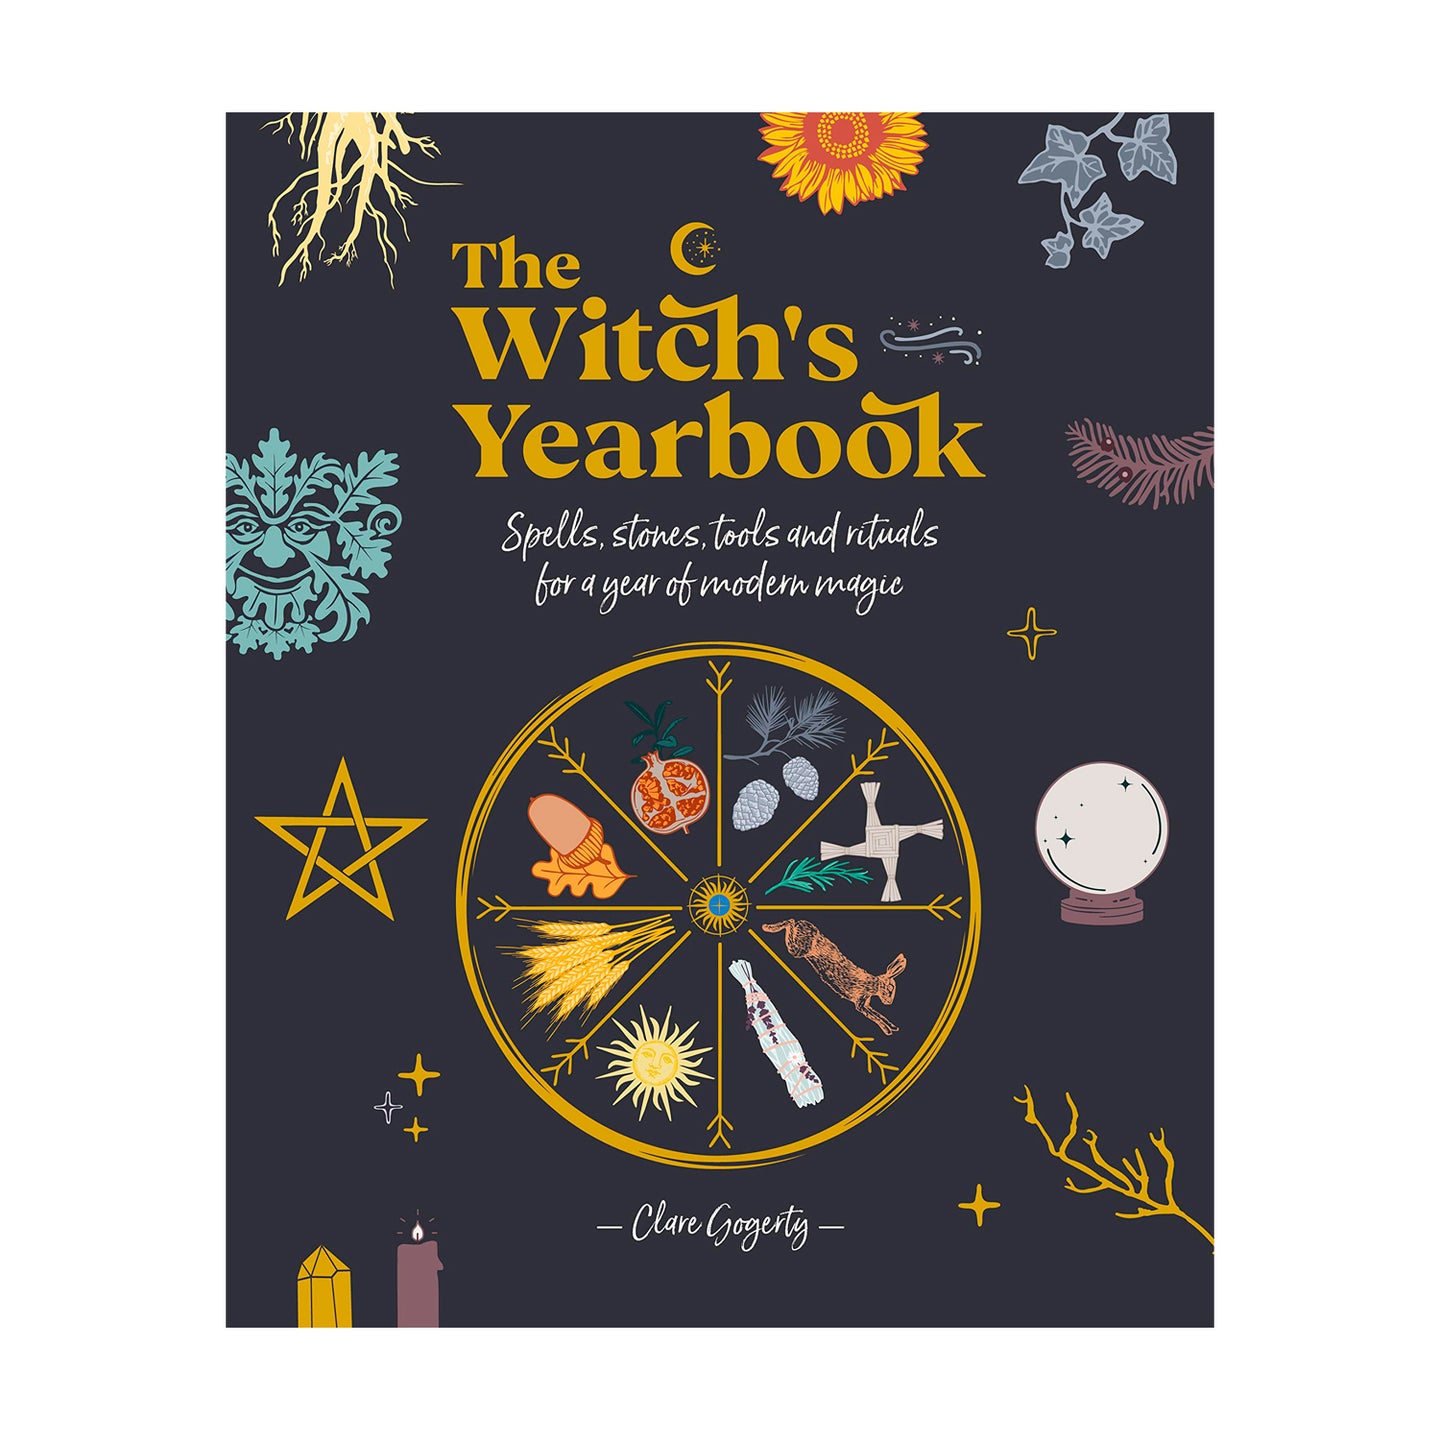 The Witch’s Yearbook